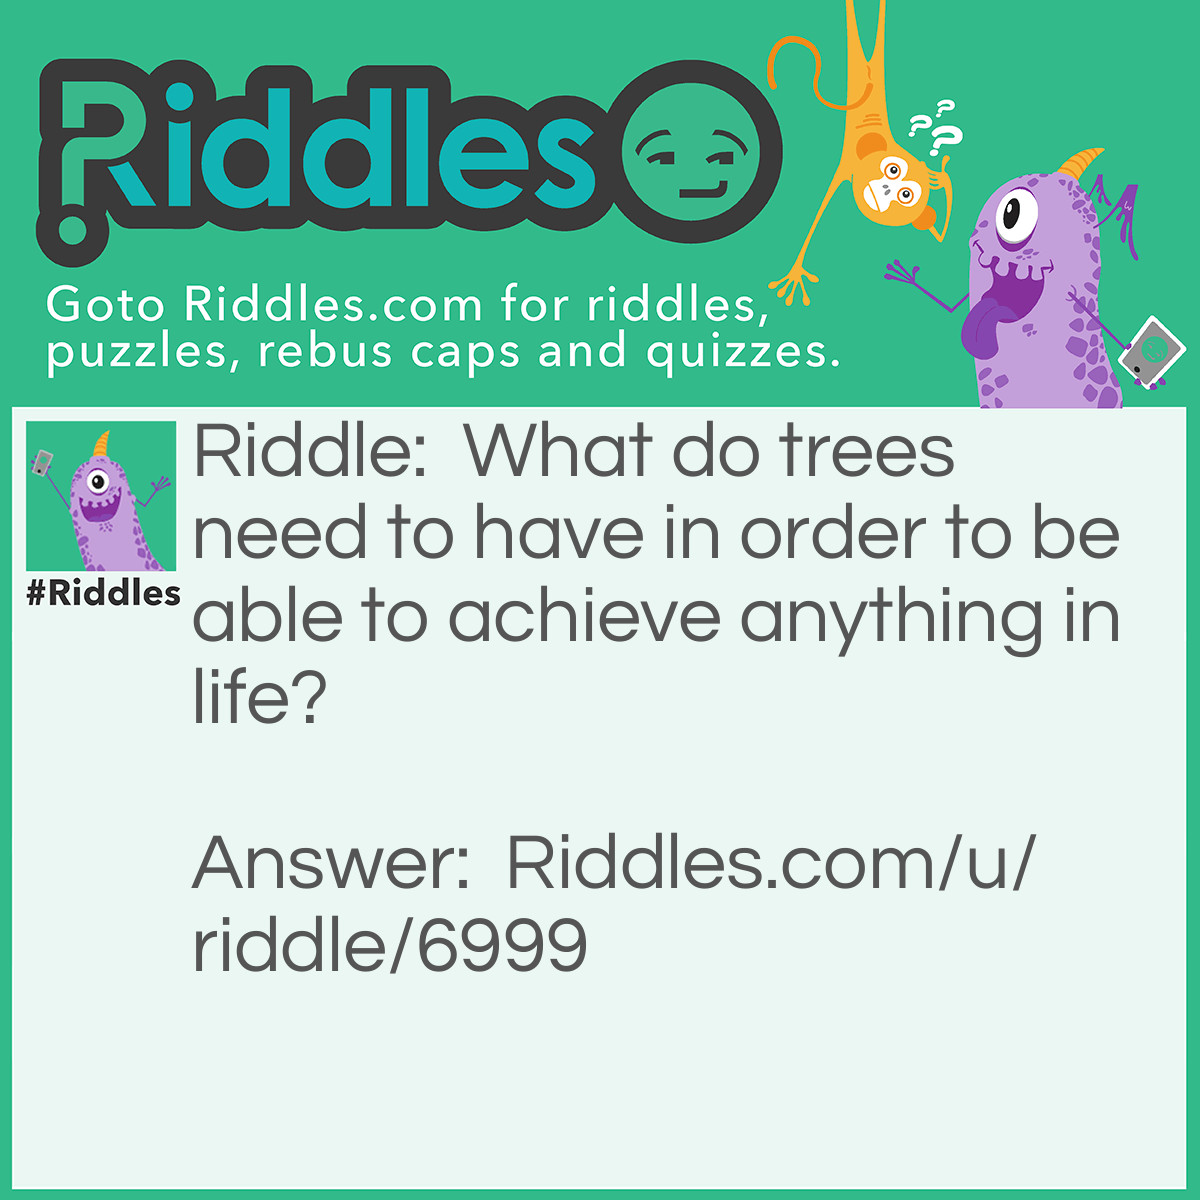 Riddle: What do trees need to have in order to be able to achieve anything in life? Answer: Be-leaf.